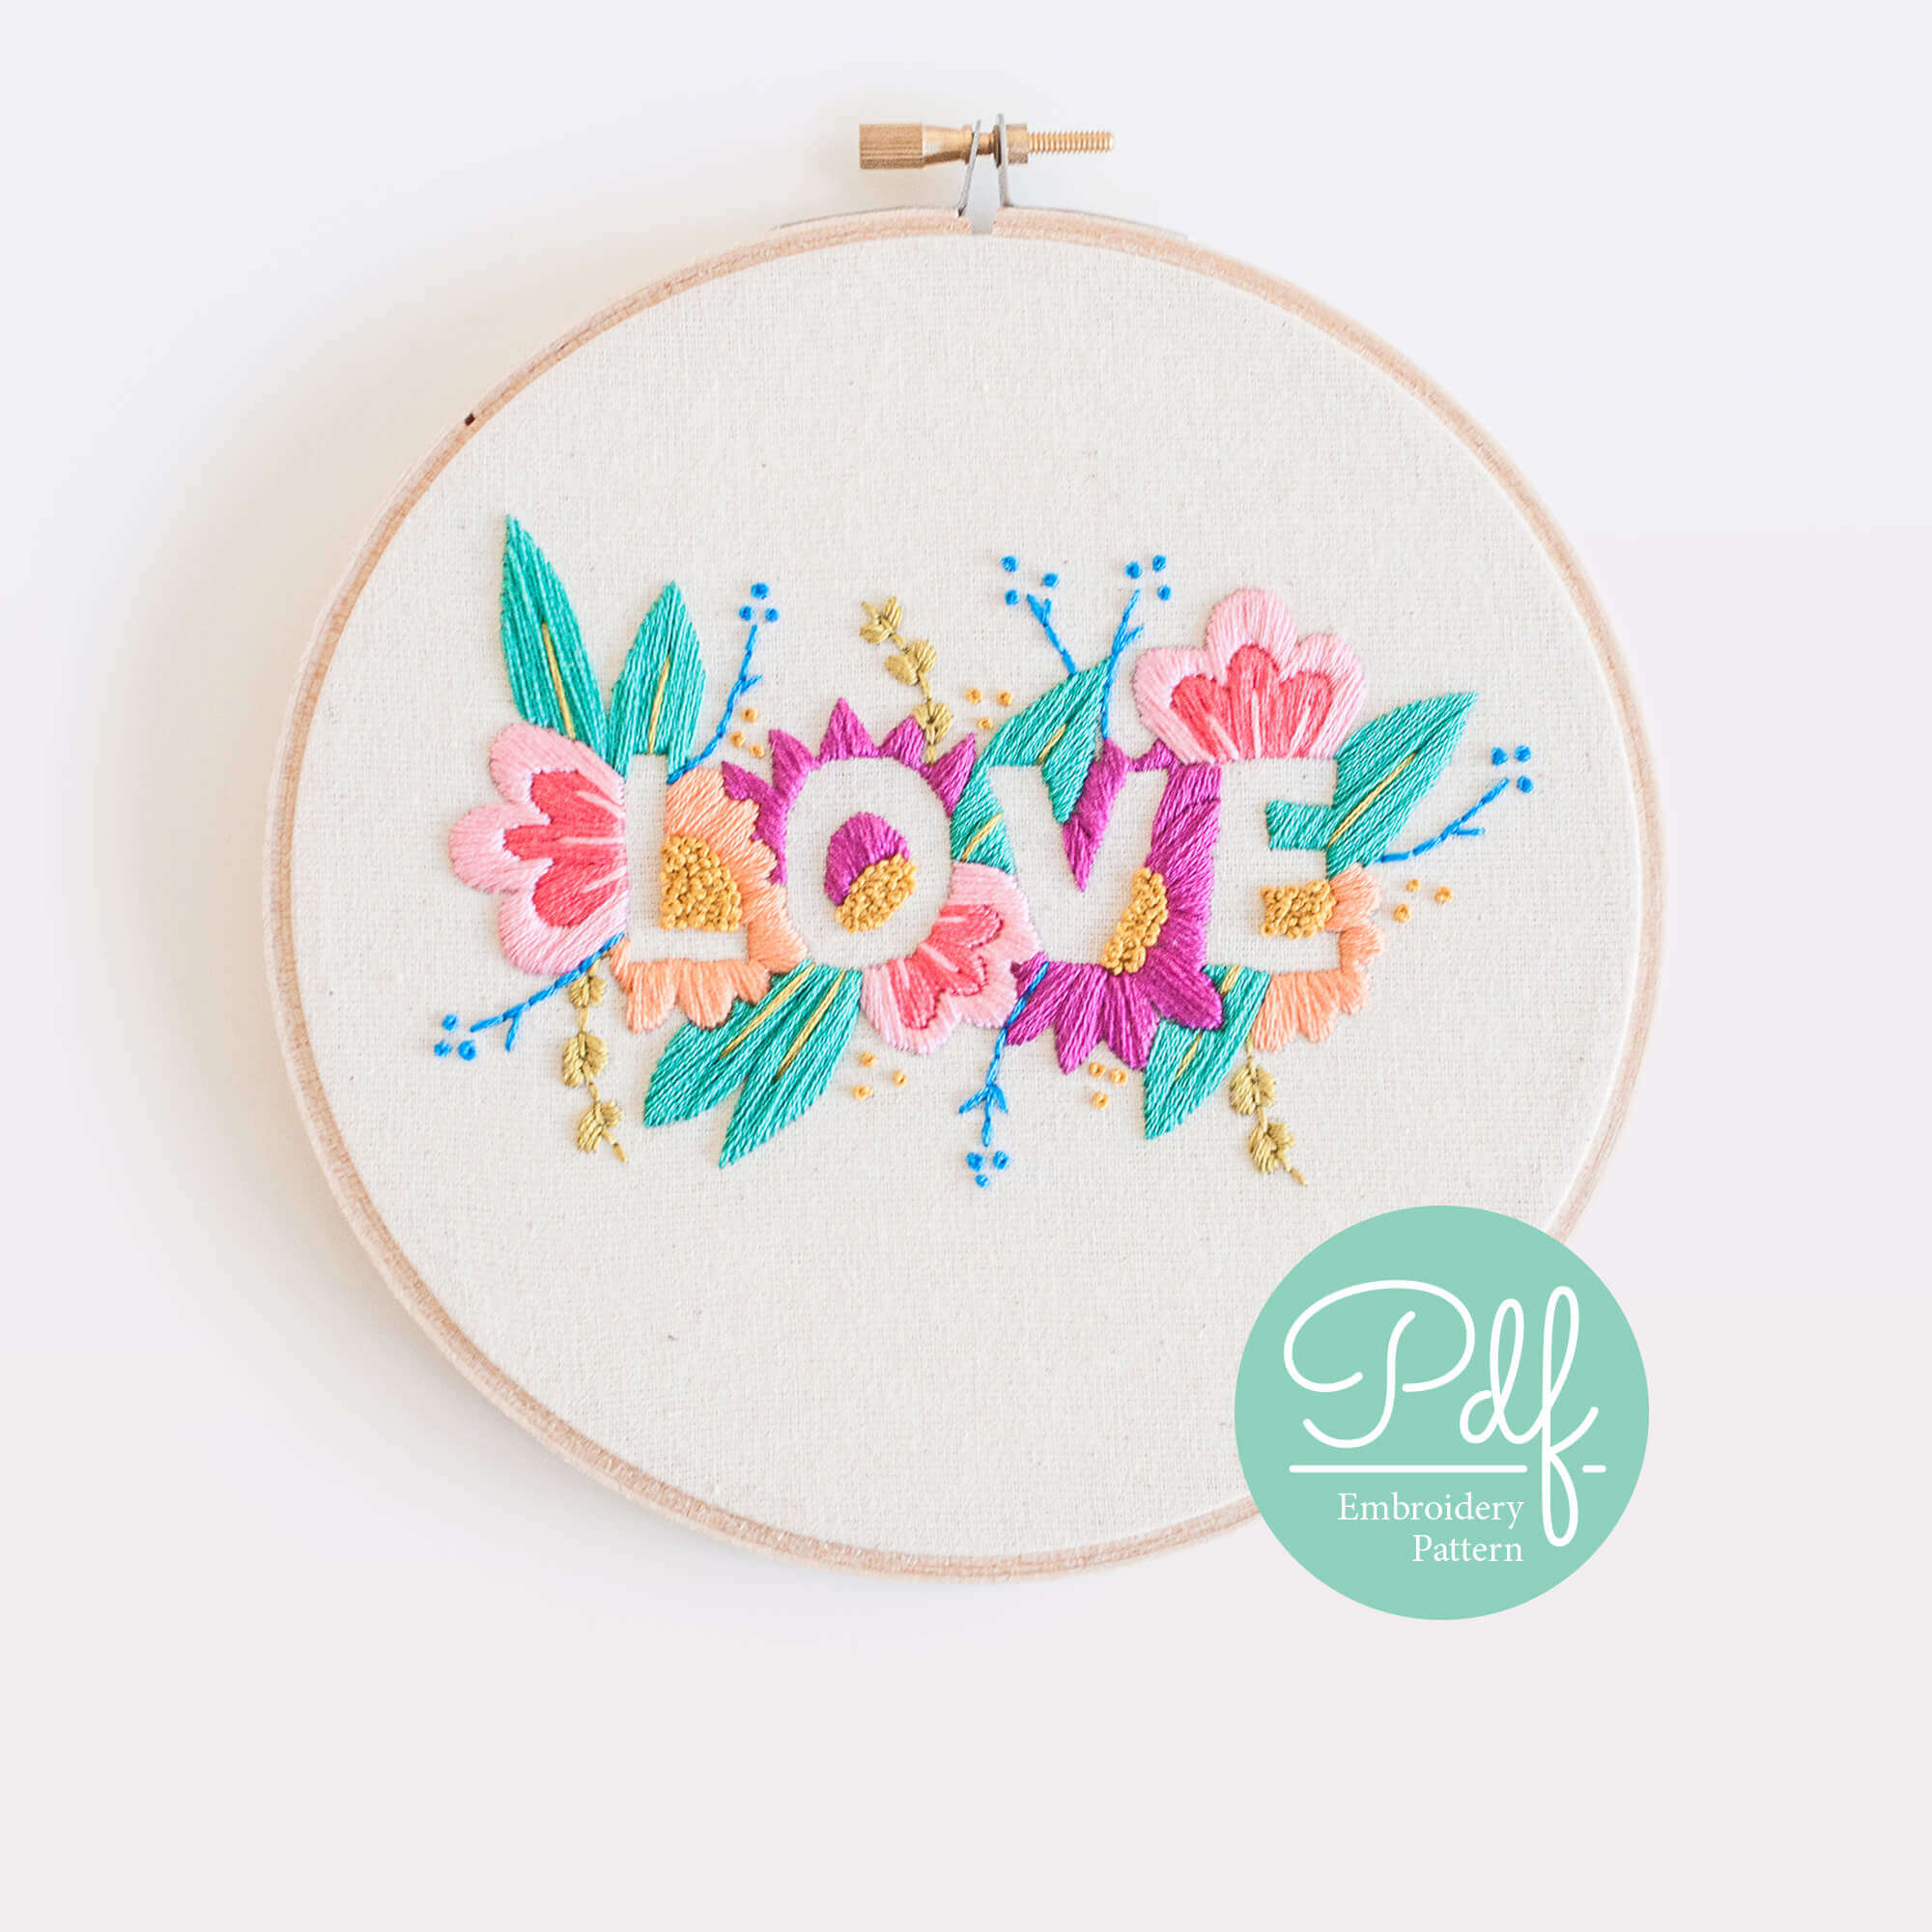 https://brynnandco.com/wp-content/uploads/2018/04/Embroidery_Pattern_Love-1.jpg